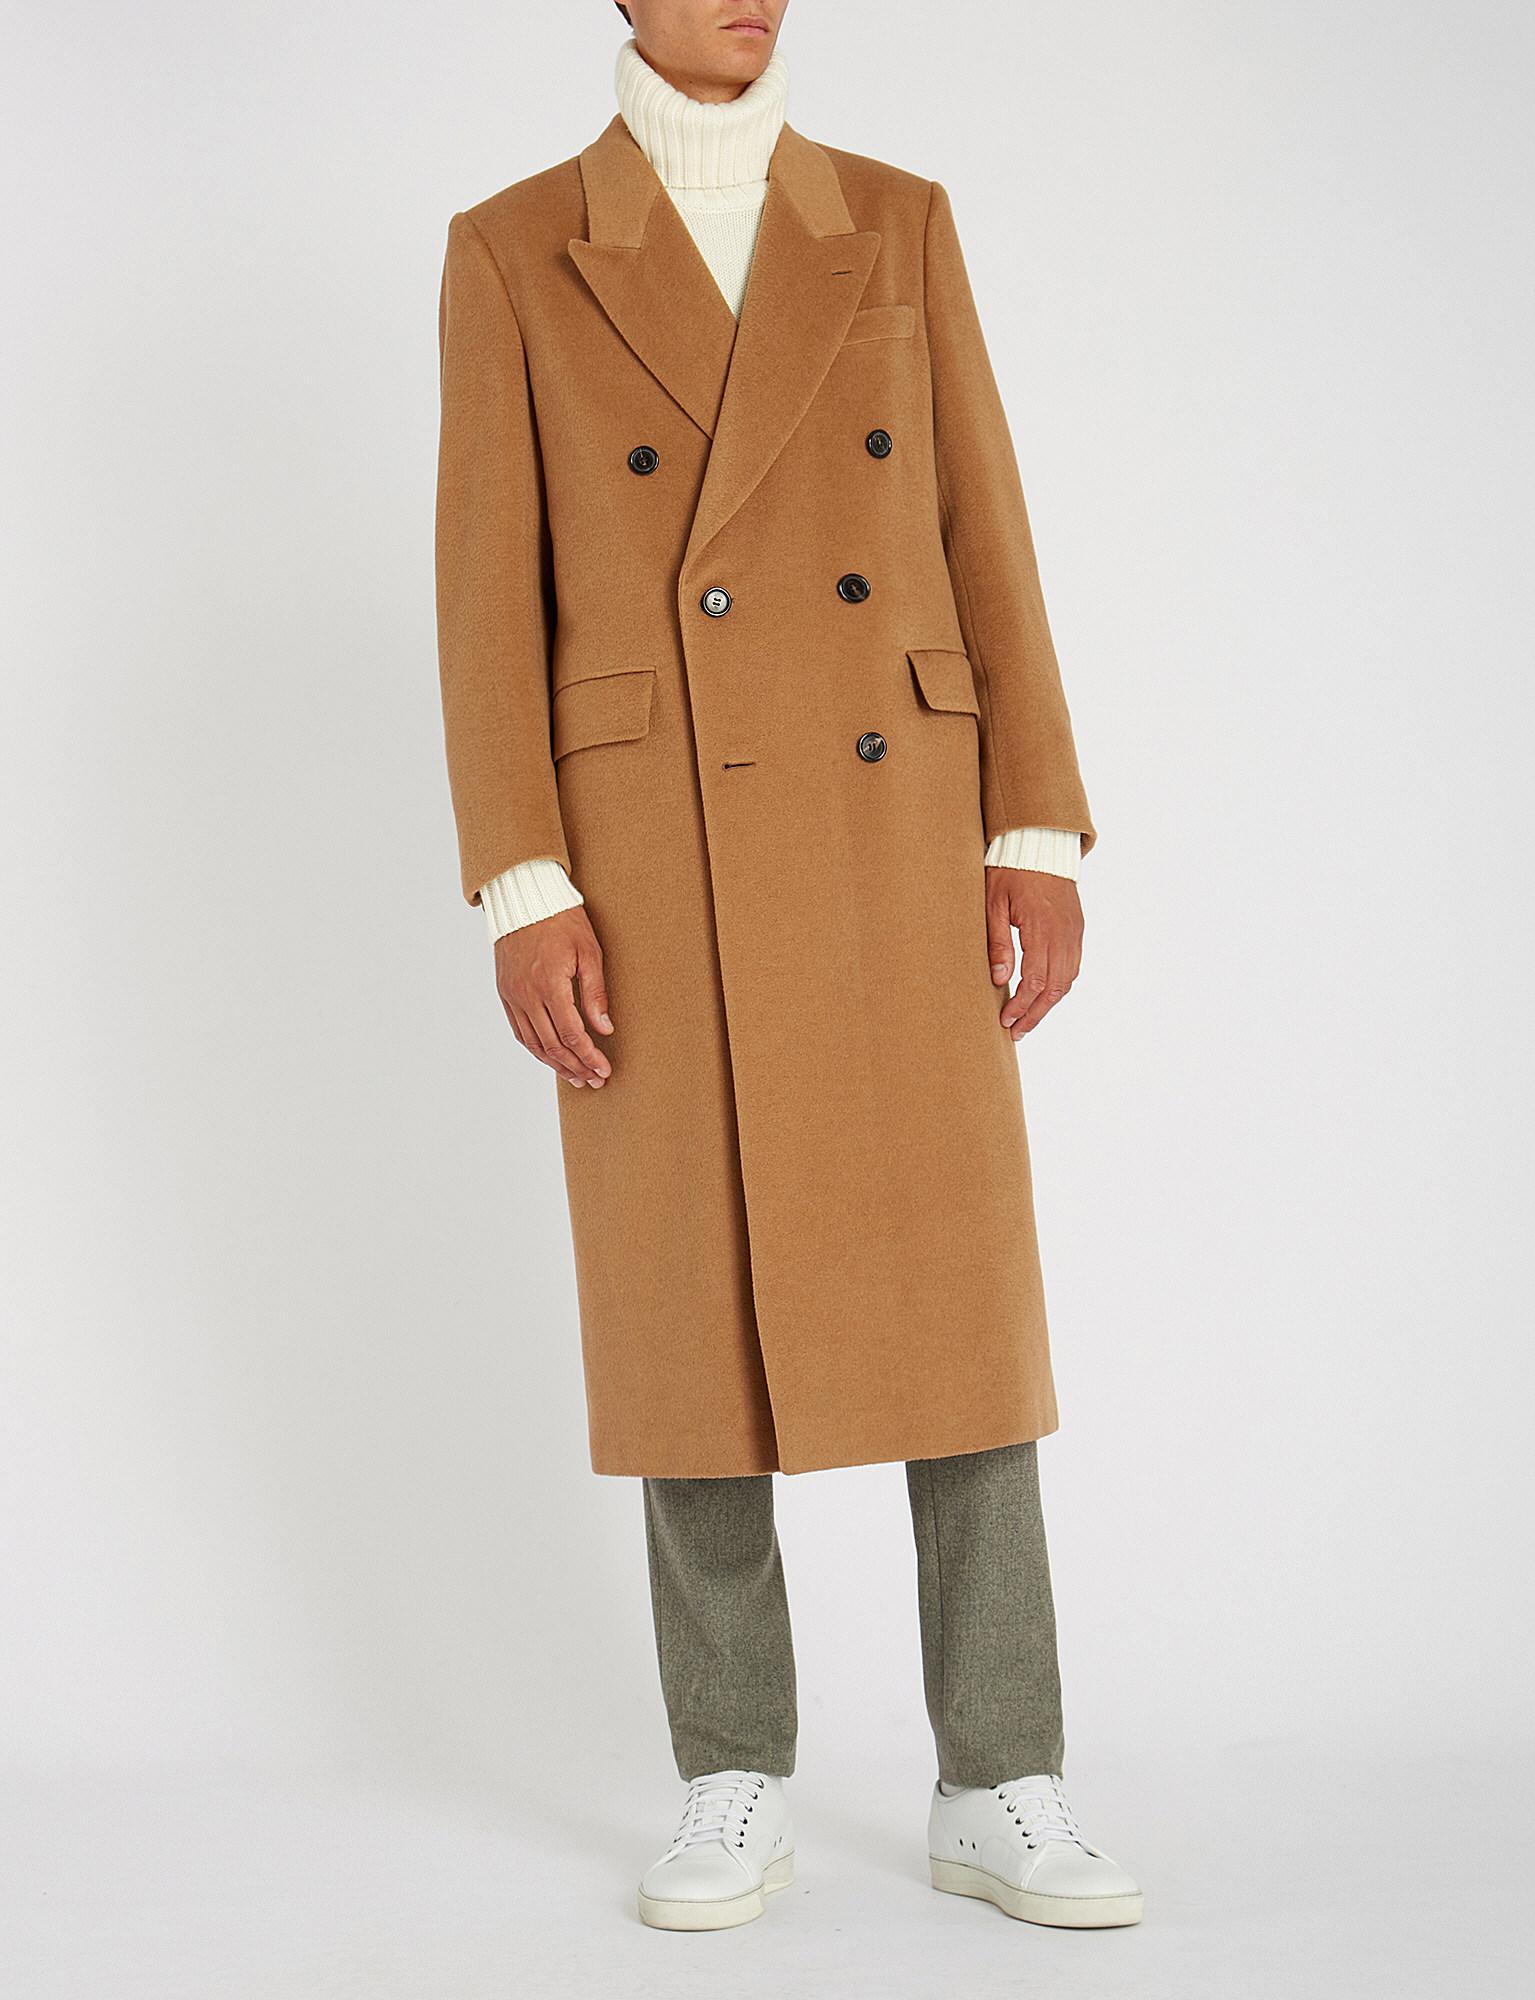 Brioni Double-breasted Camel-hair Coat in Natural for Men | Lyst